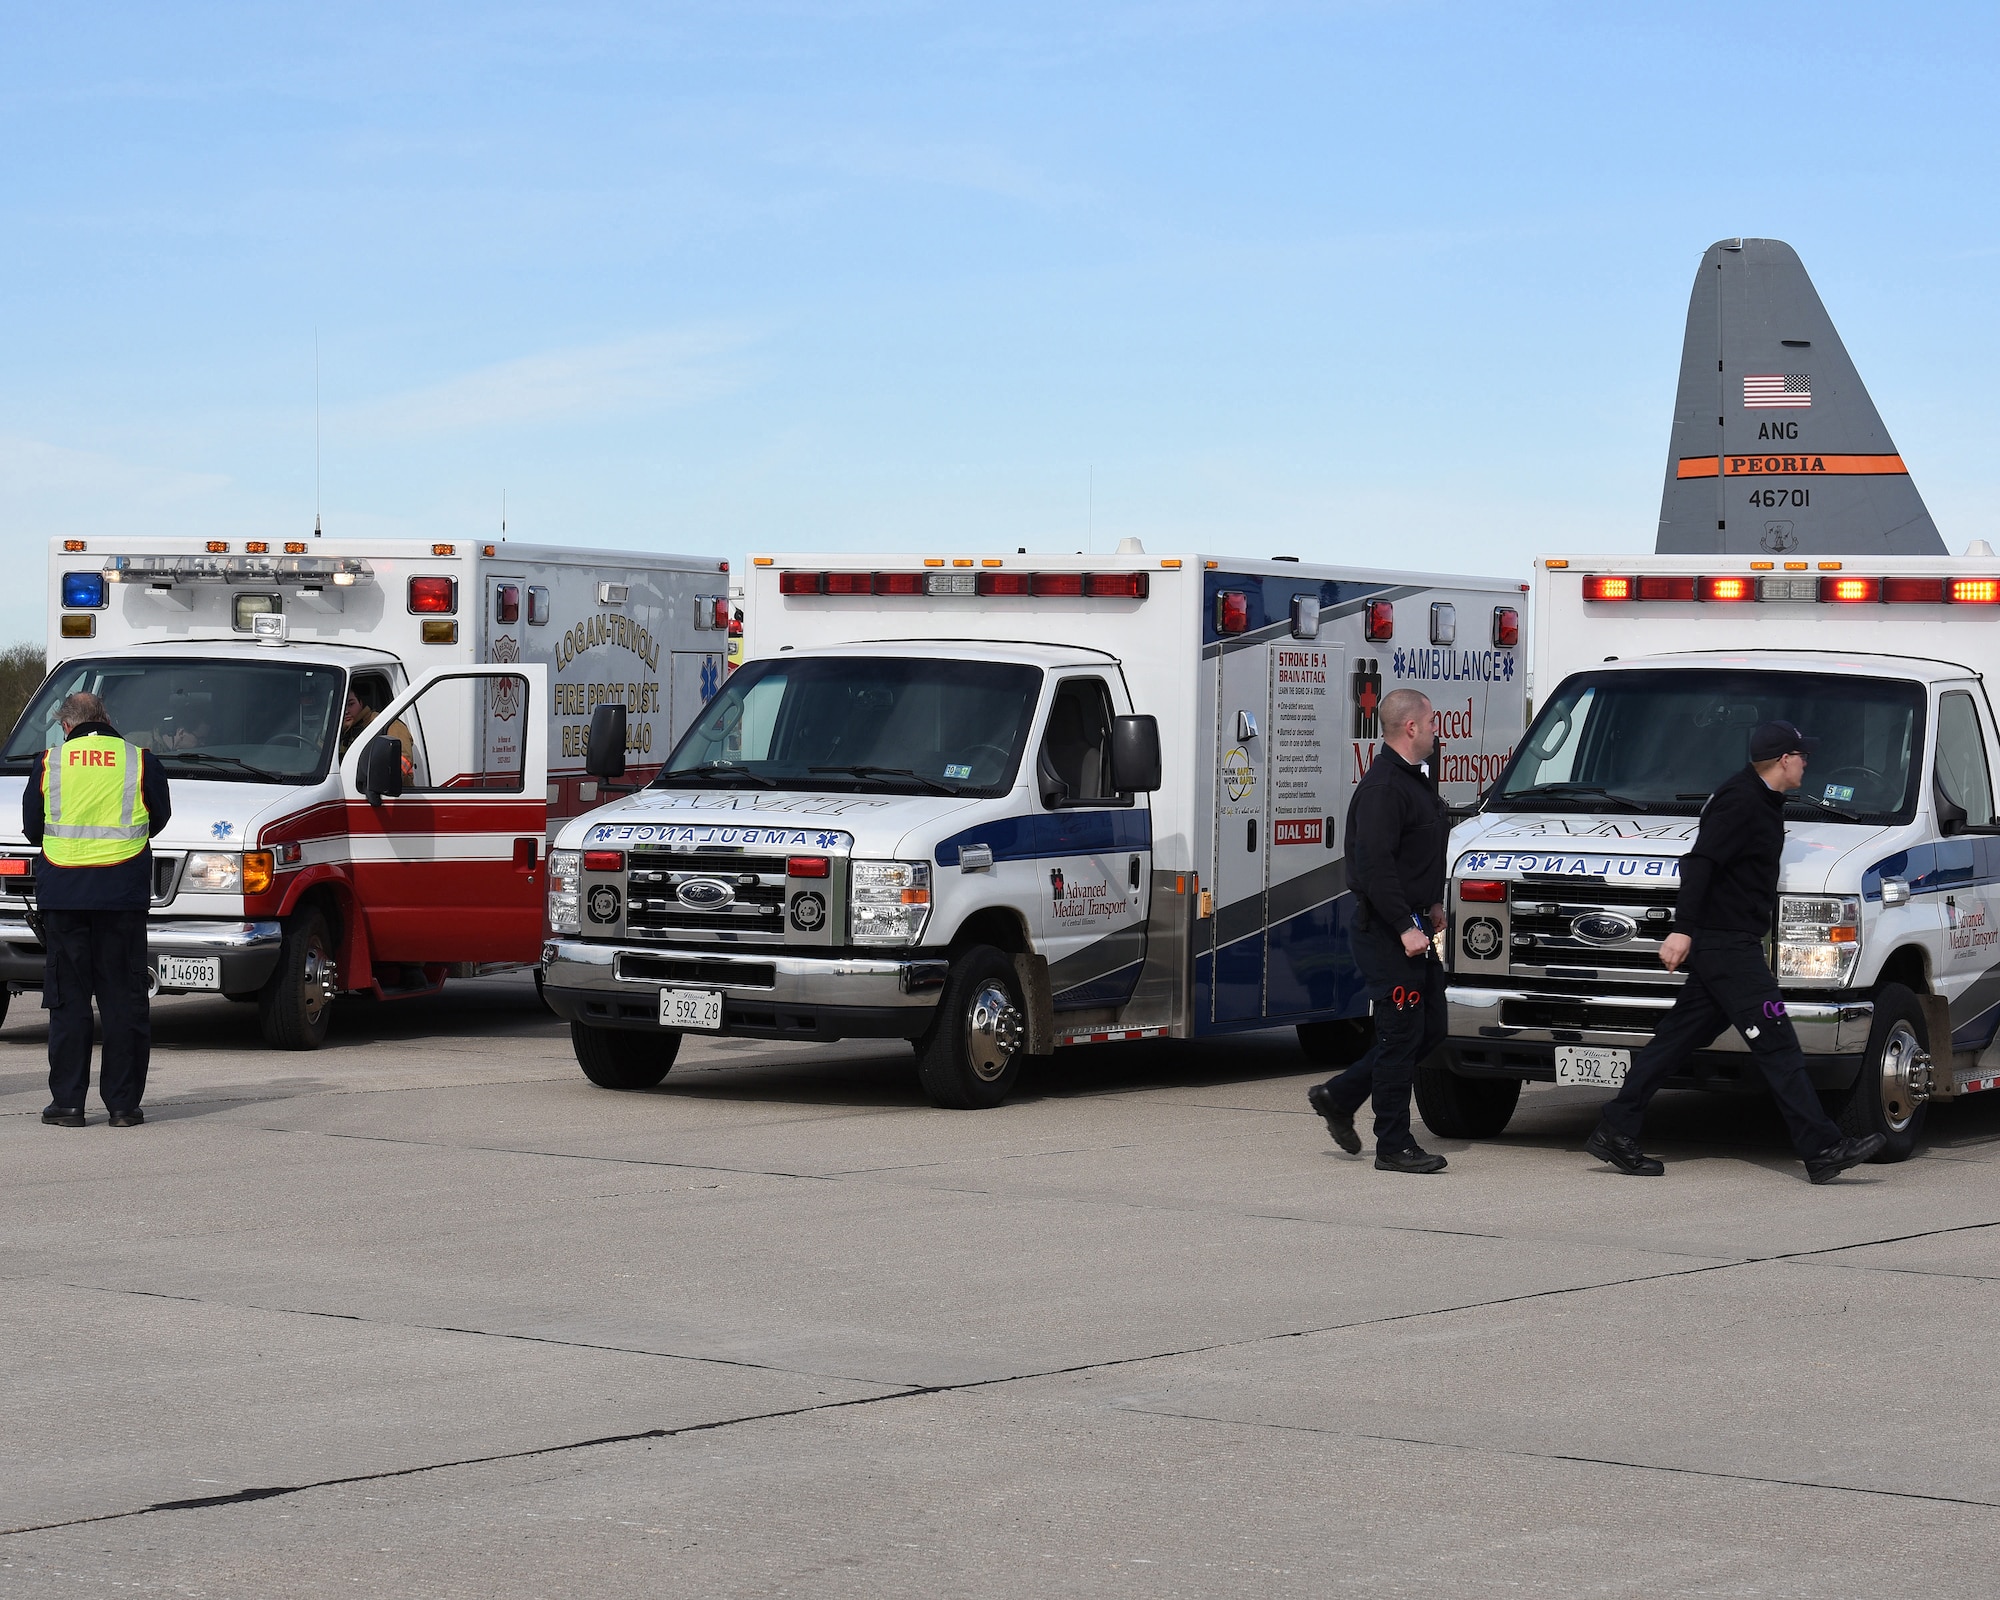 Ambulances from Advanced Medical Transport and Logan-Trivoli Fire Protection District stage to receive victims from a simulated airliner crash at the General Wayne A. Downing Peoria International Airport in Peoria, Ill. April 22, 2017.  Thirty-eight agencies and over 200 exercise participants took part in the full-scale mass casualty exercise. (U.S. Air National Guard photo by Master Sgt. Todd Pendleton)